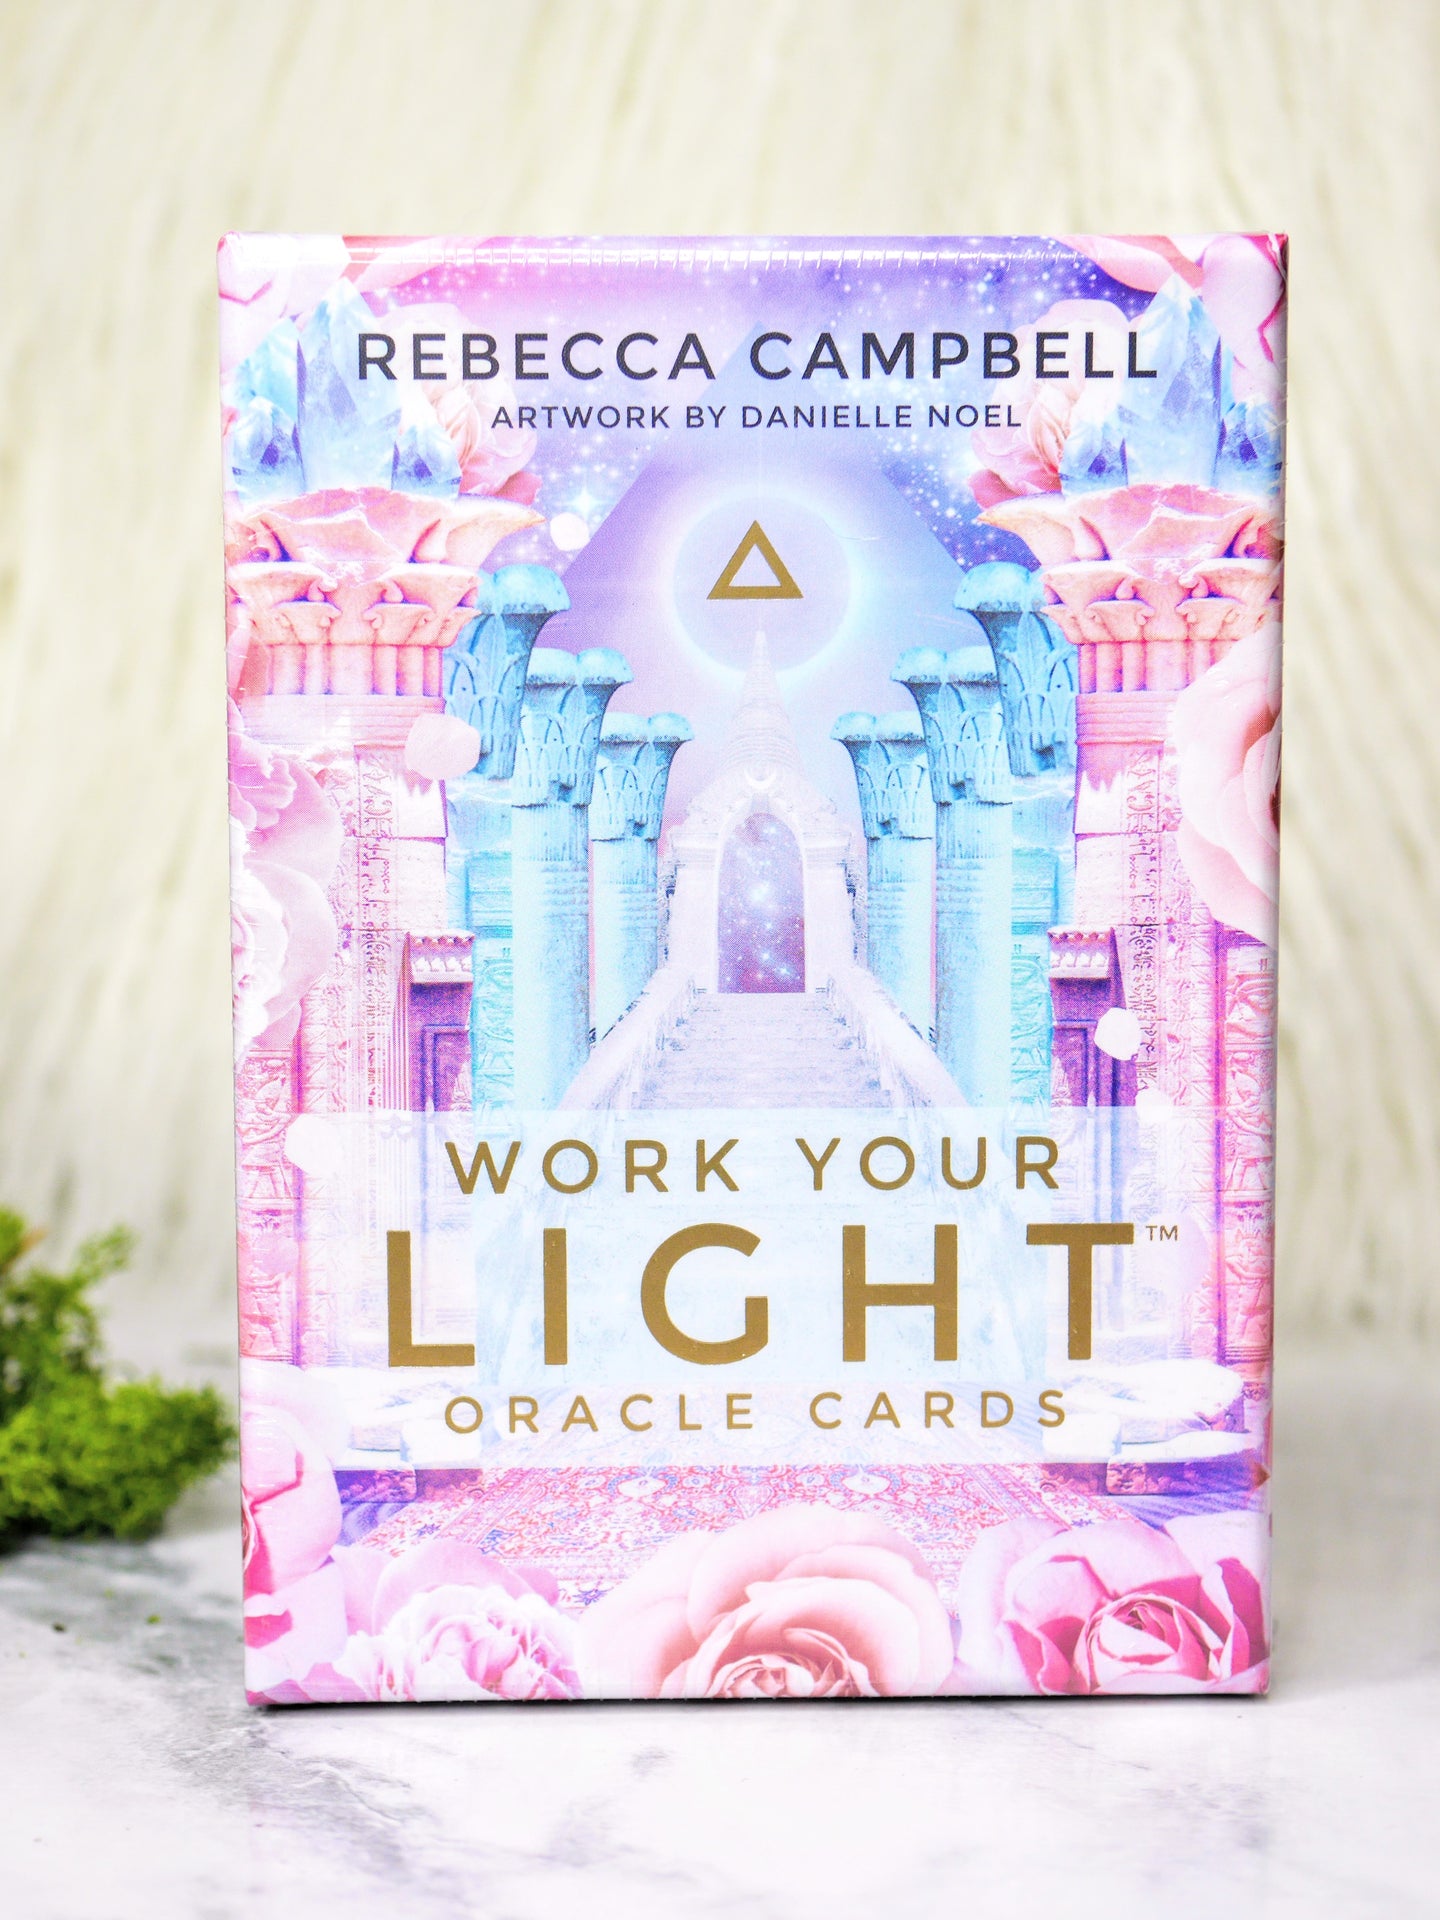 Work your light - oracle cards